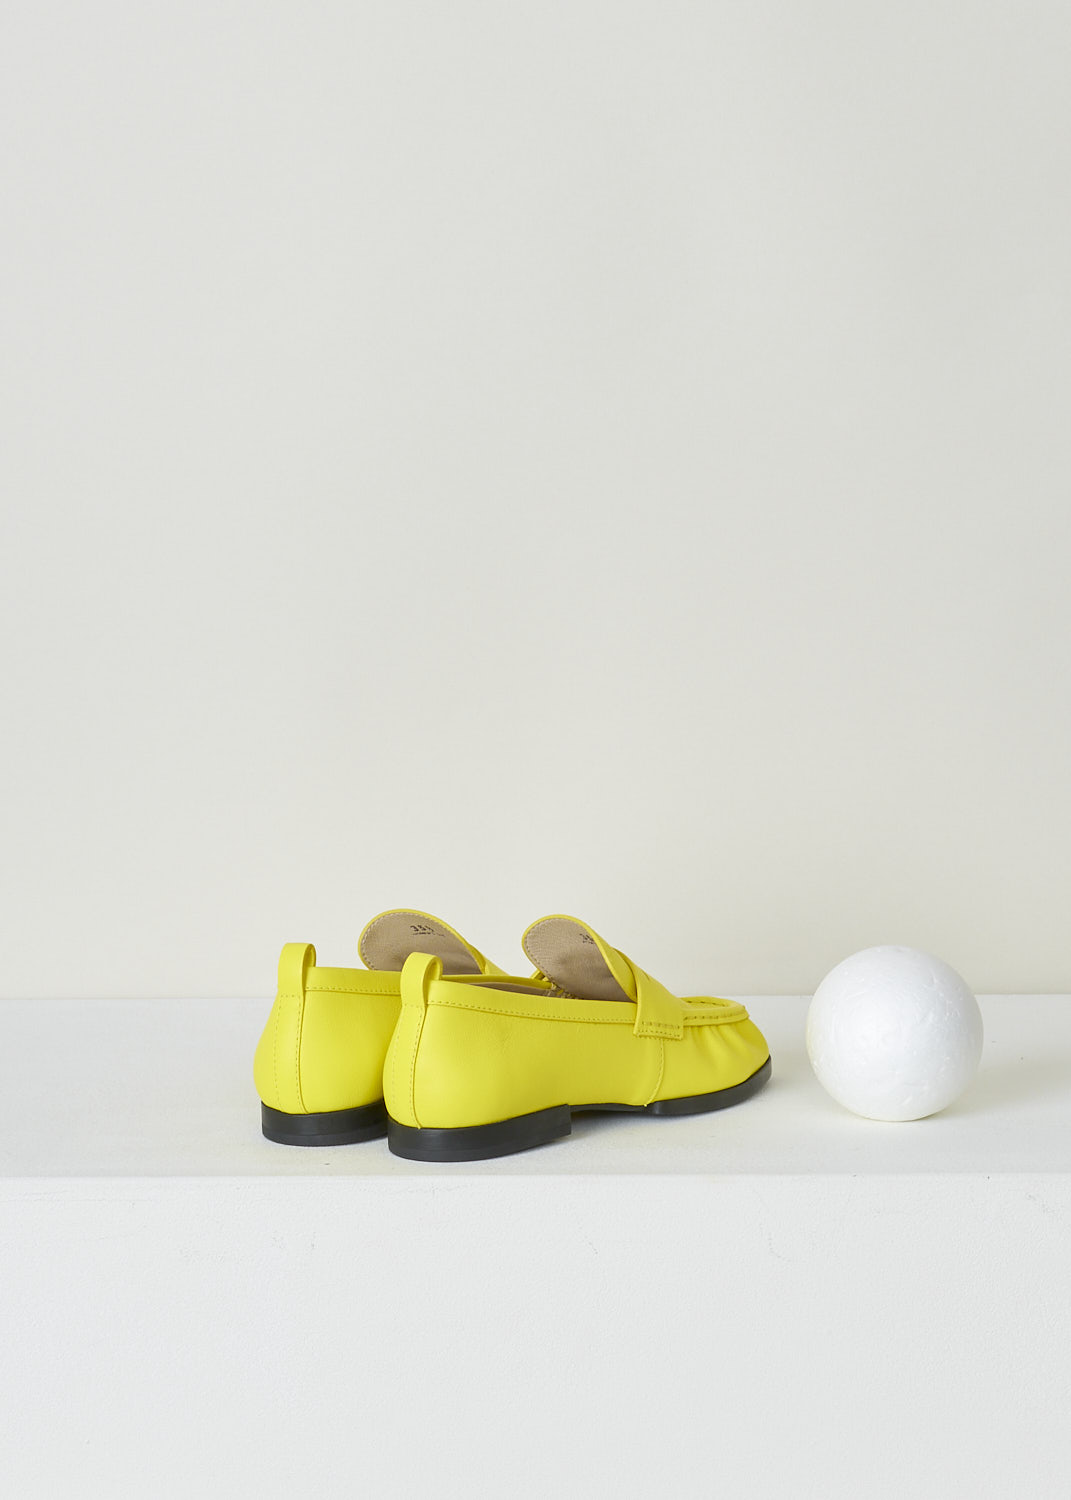 TODS, BRIGHT YELLOW PENNY LOAFERS, XXW02E0EC60PHXG009_PHX_HOLIDAY, Yellow, Back, These bright yellow slip-on penny loafers have a rounded toe and a decorative slotted leather strip over the upper side. Around the trim, the leather is subtly pleated. These loafers have black soles.
